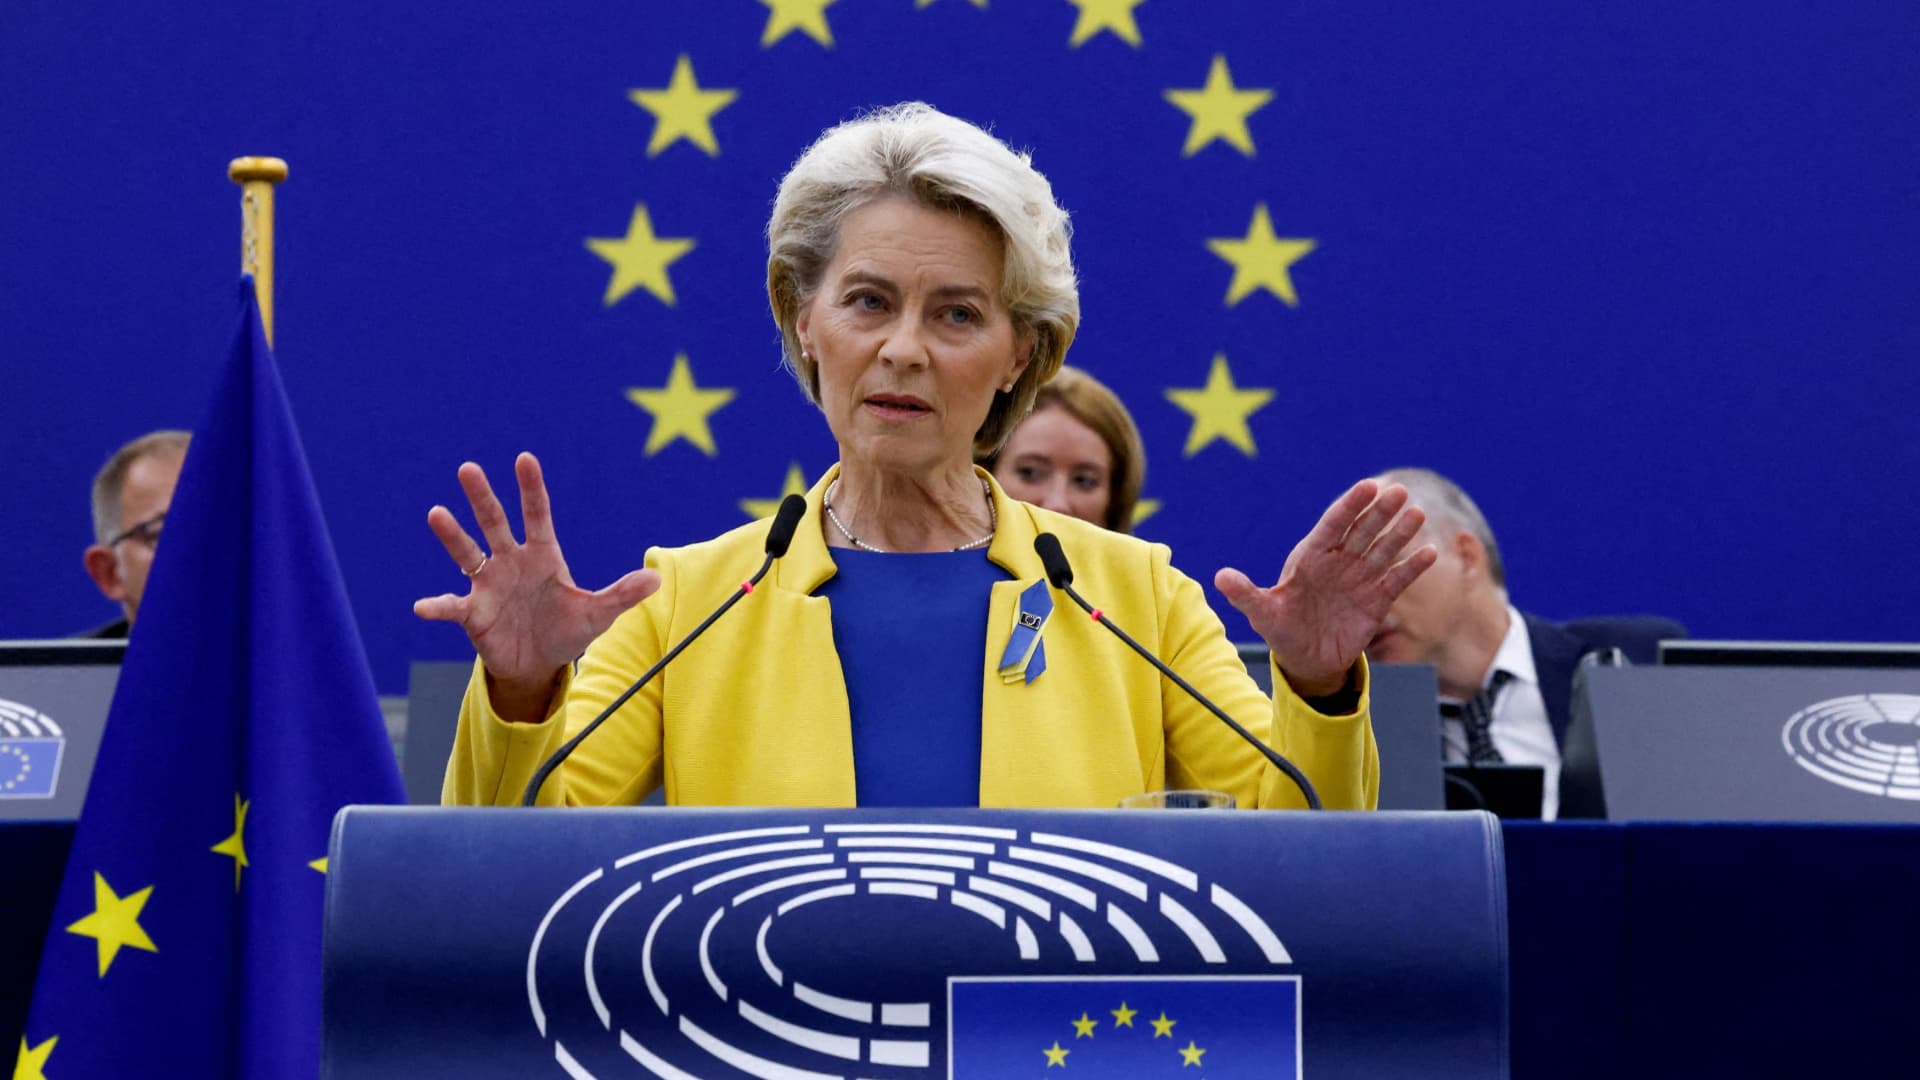 European Commission President Ursula von der Leyen delivers the State of the European Union address to the European Parliament, in Strasbourg, France, on Sept. 14, 2022.